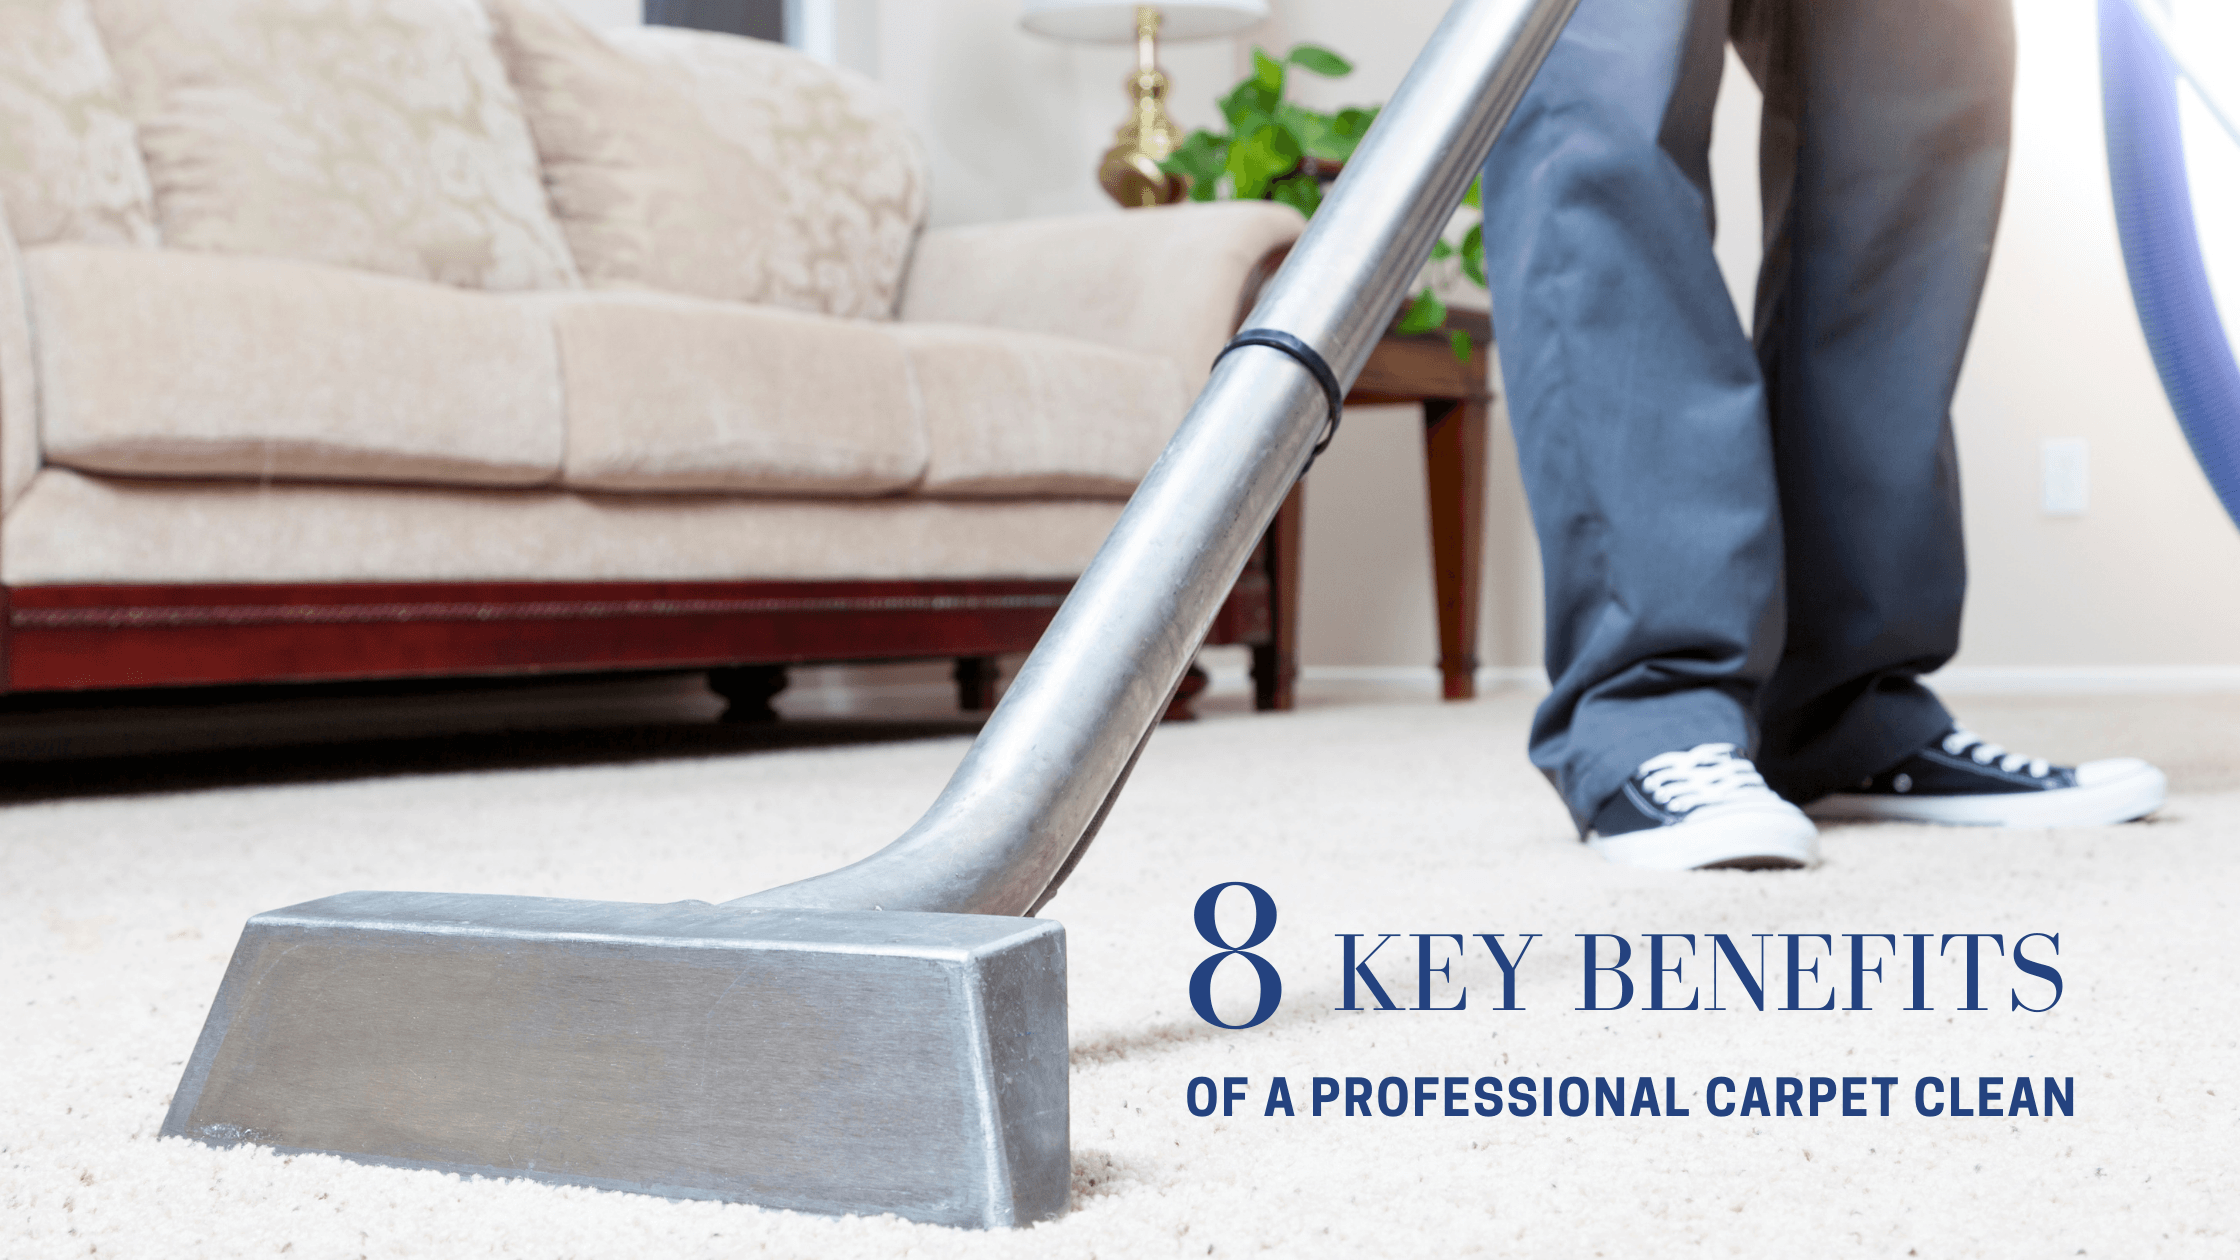 The 8 Key Benefits of a Professional Carpet Clean 1